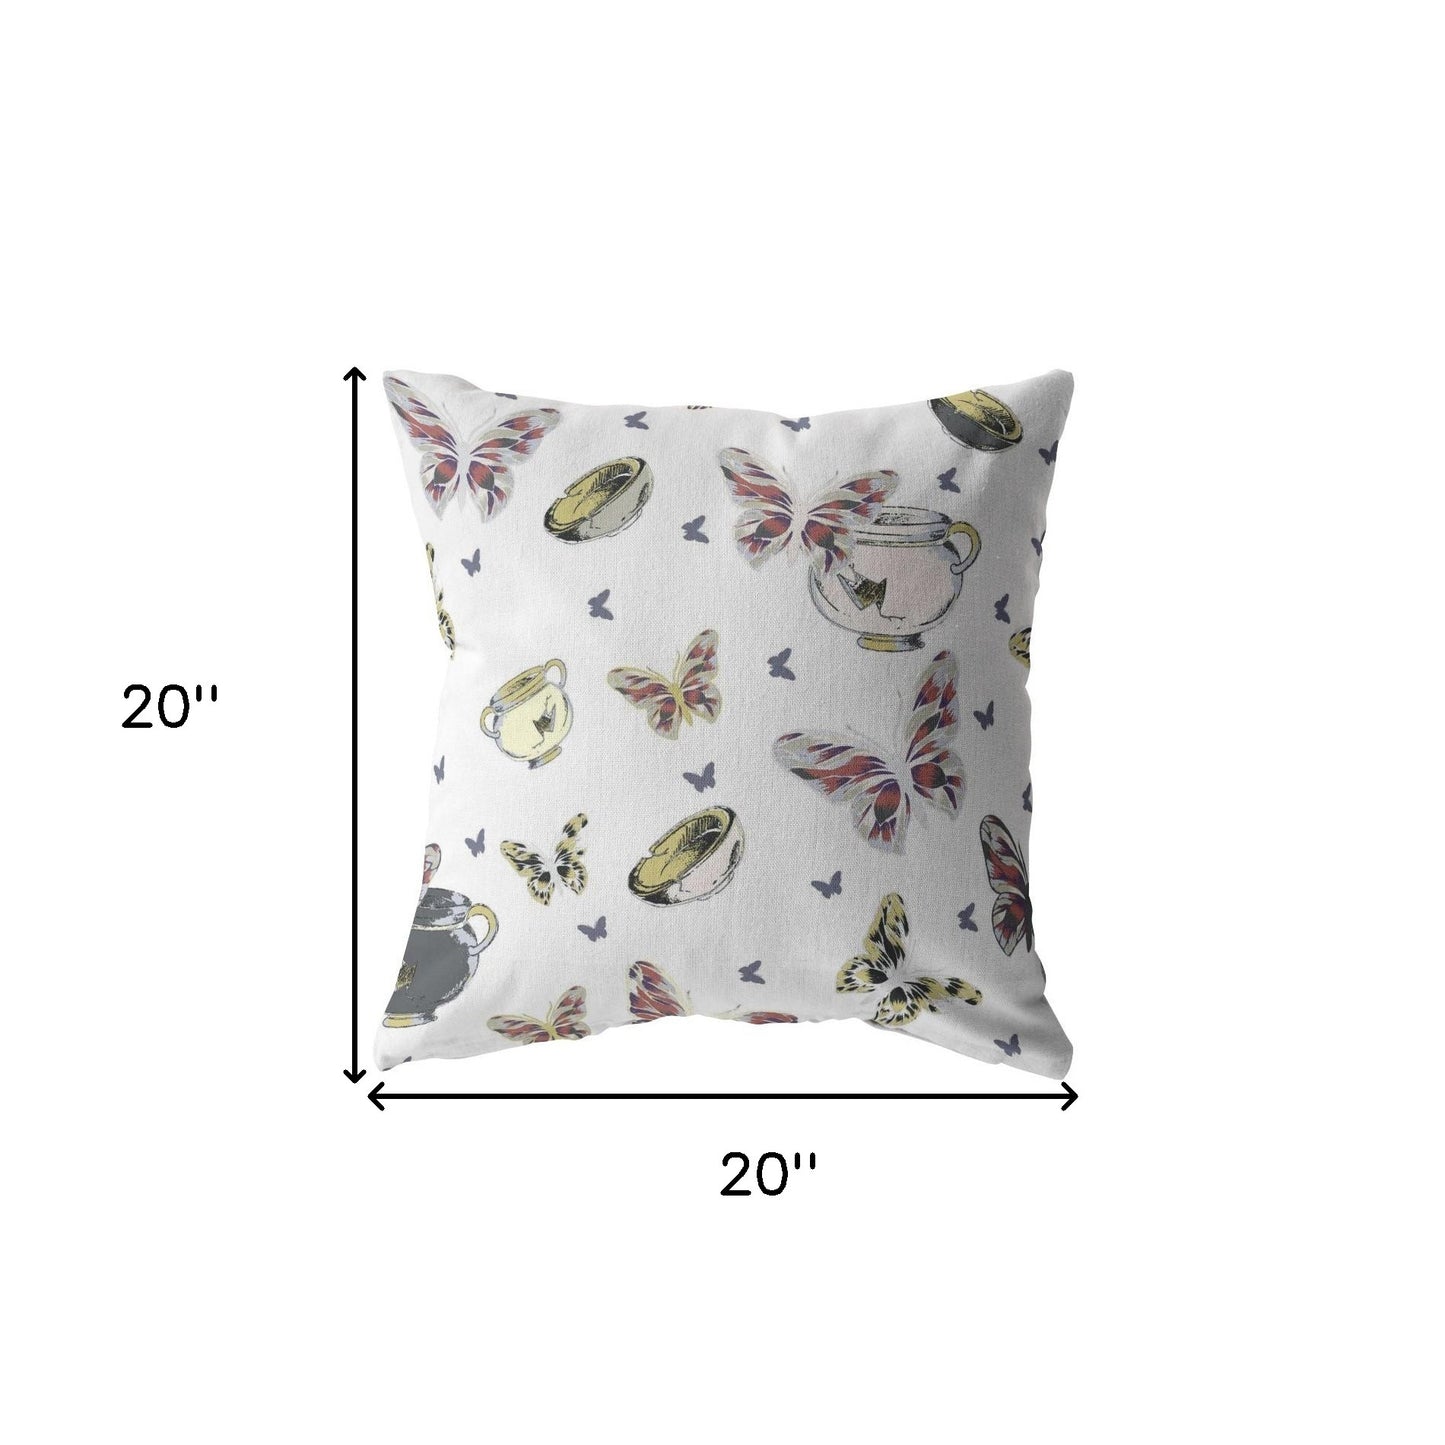 18" White Butterflies Decorative Suede Throw Pillow